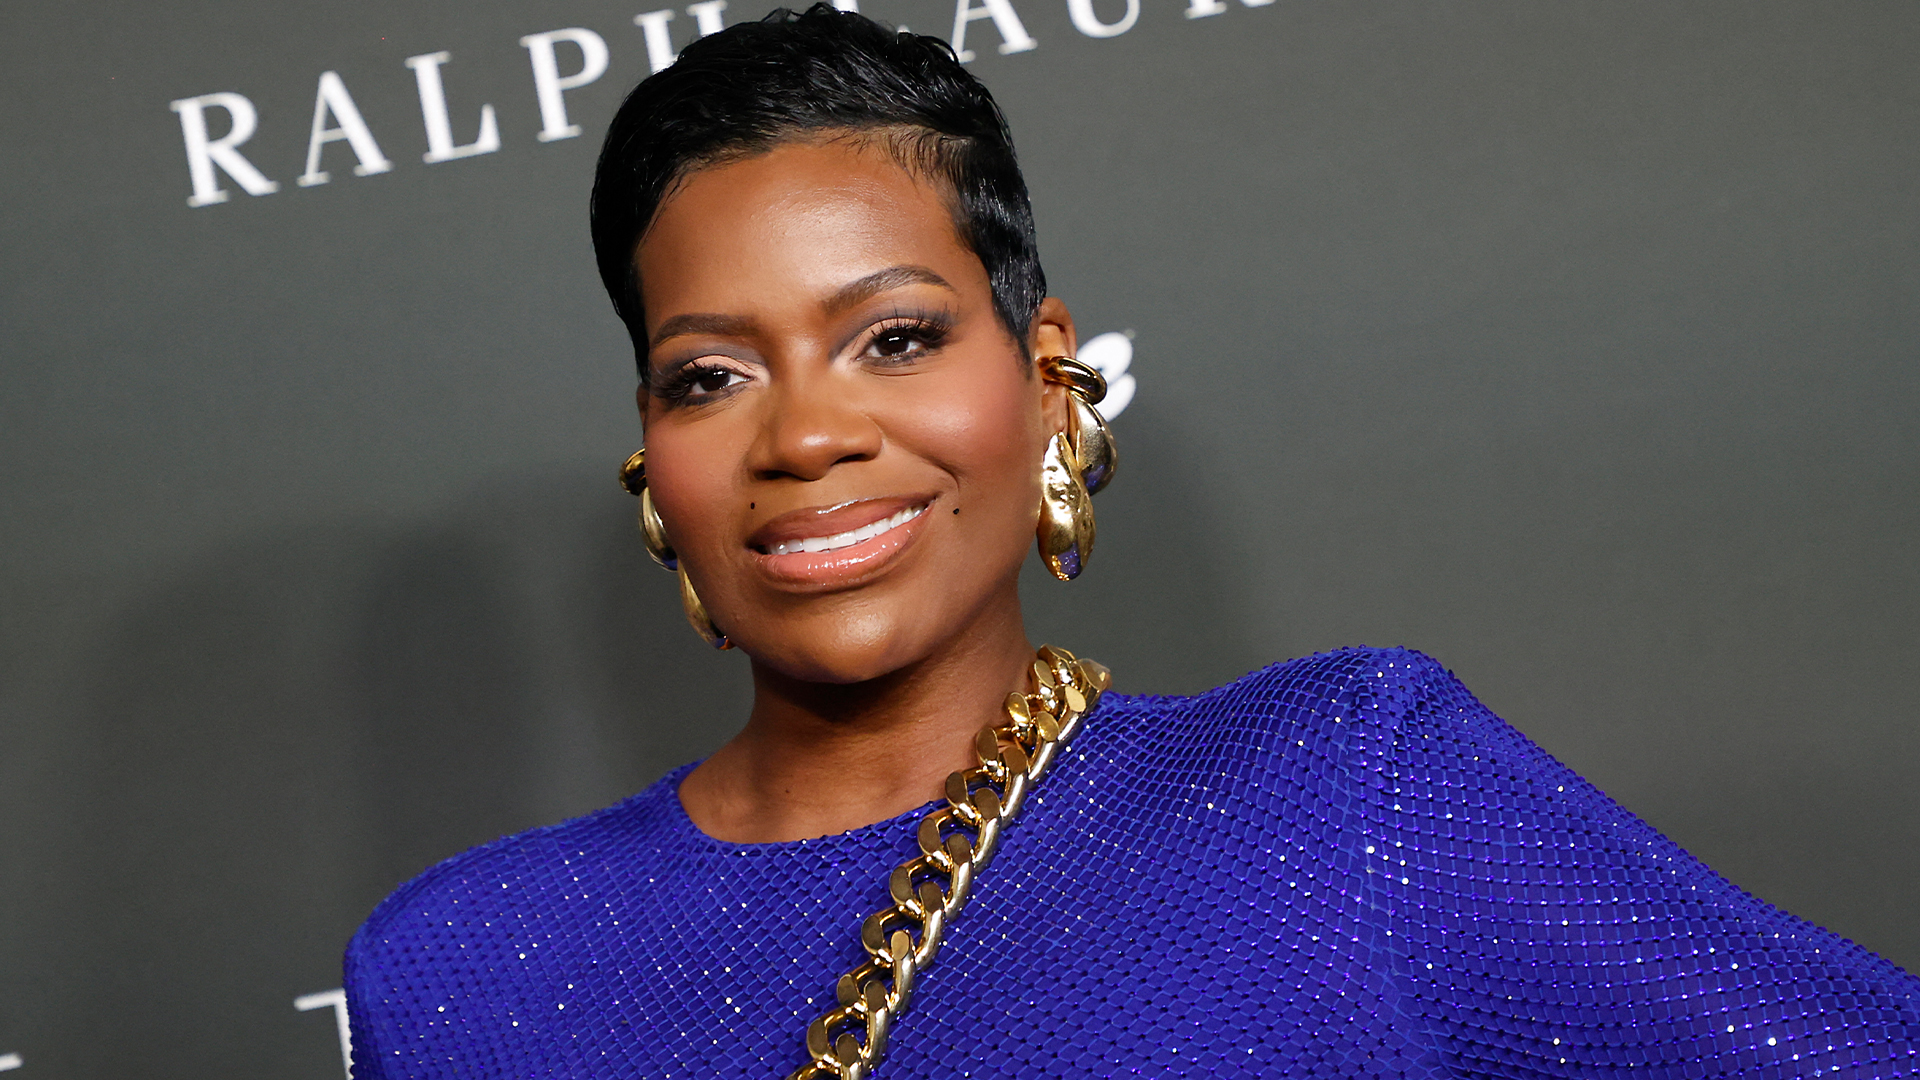 Fantasia Barrino Says She 'Lost Everything' After Winning 'American Idol'— 'I Didn't Know Anything About Checking Your Money'